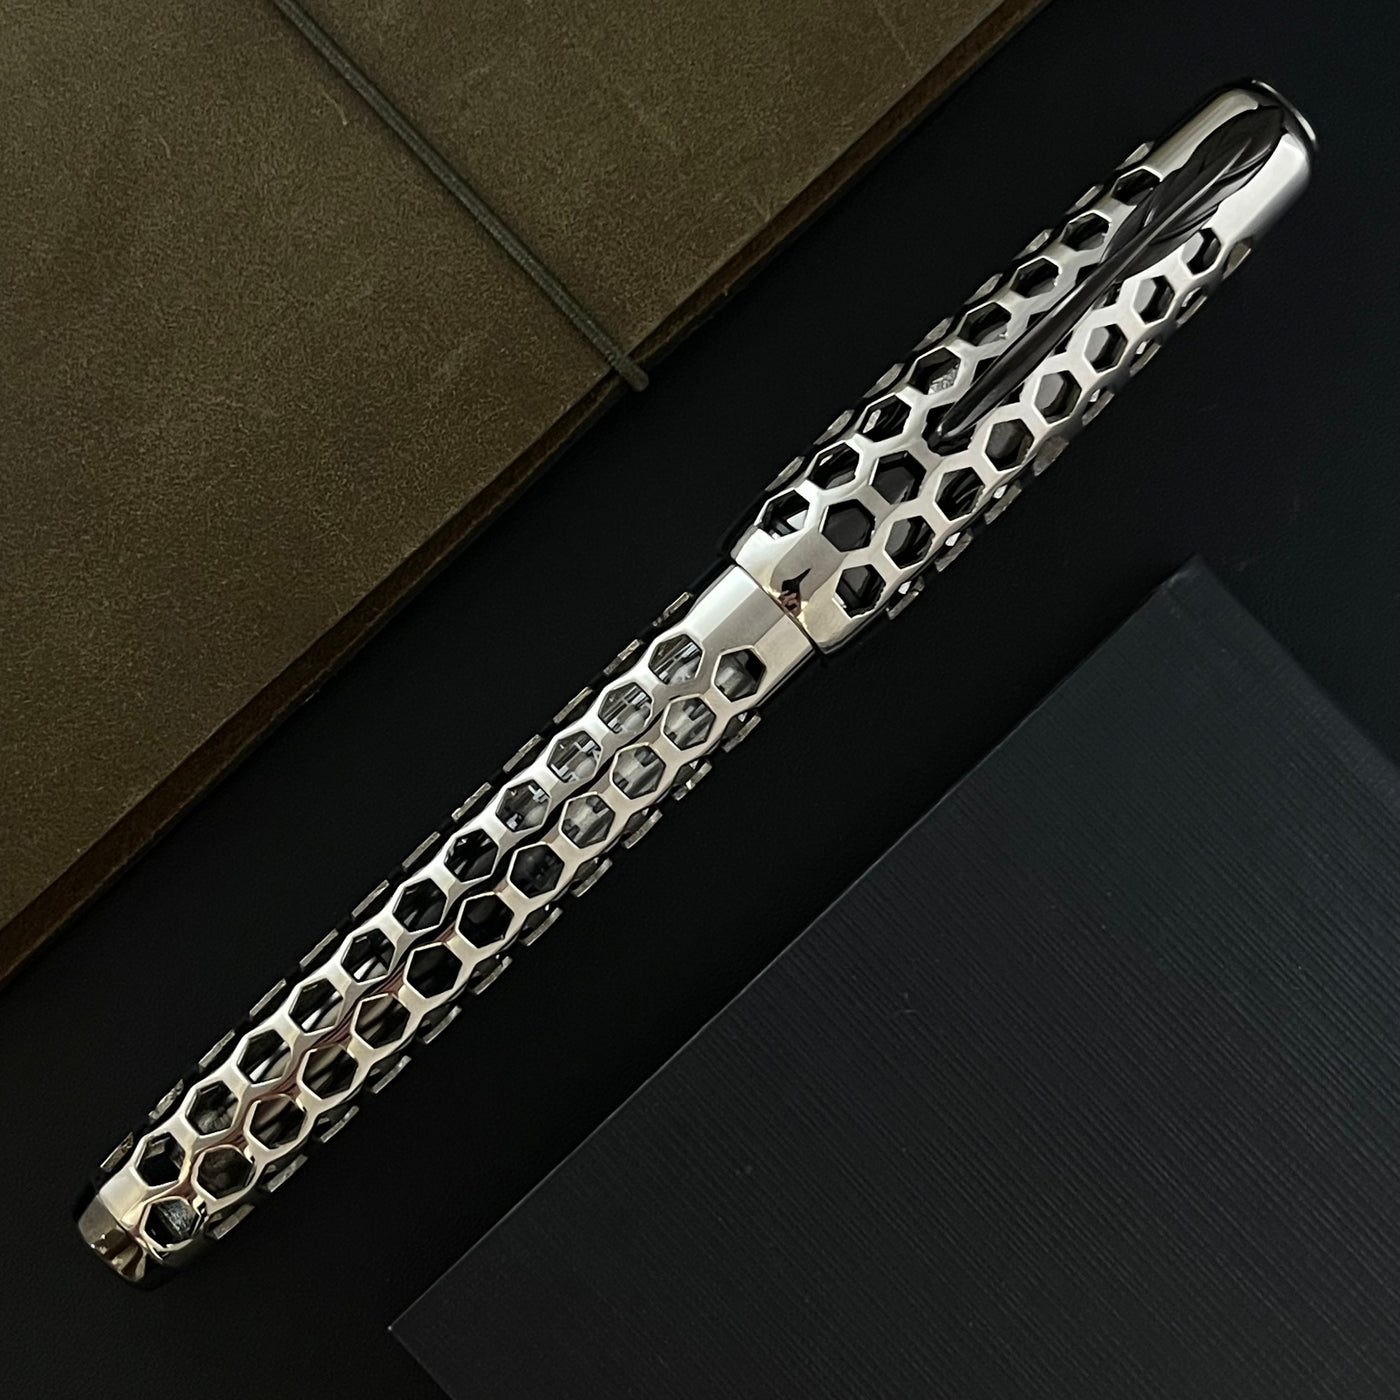 Pineider Honeycomb Fountain Pen - Silver (Limited Edition)